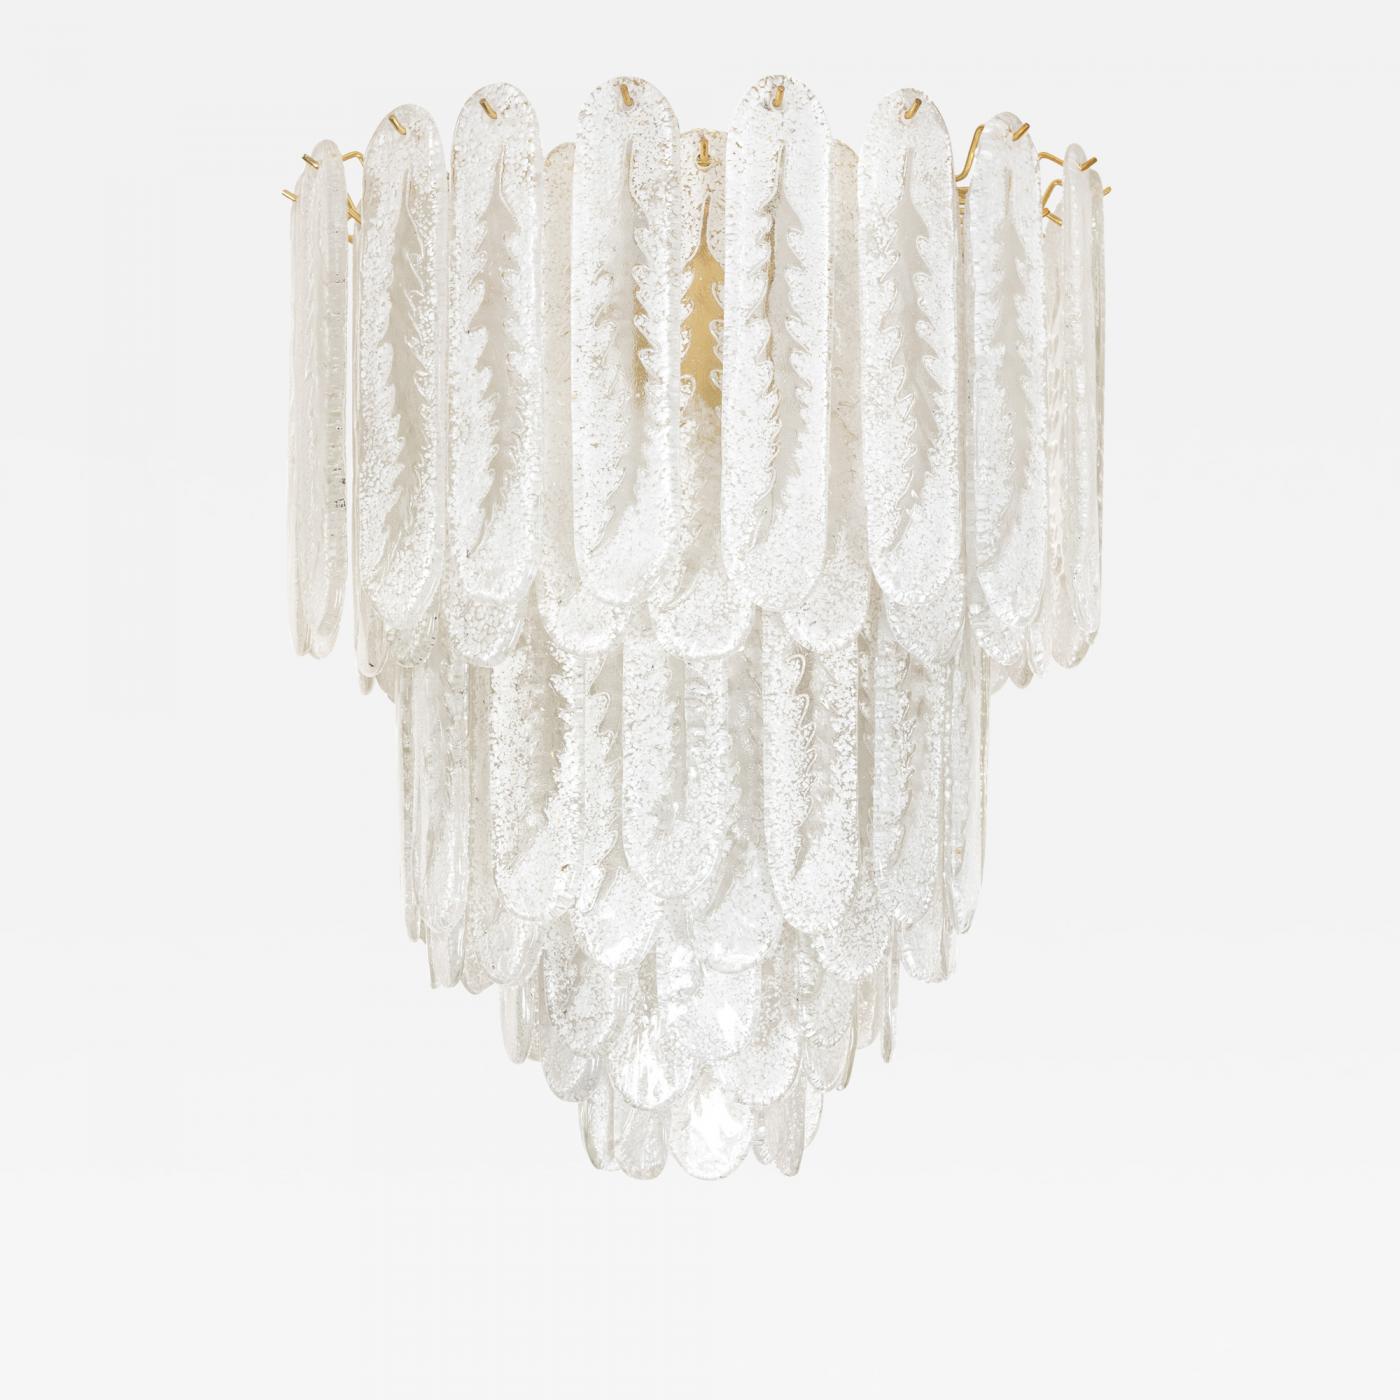 Frosted Glass Pendant Light listings furniture lighting chandeliers and pendants vintage murano frosted glass